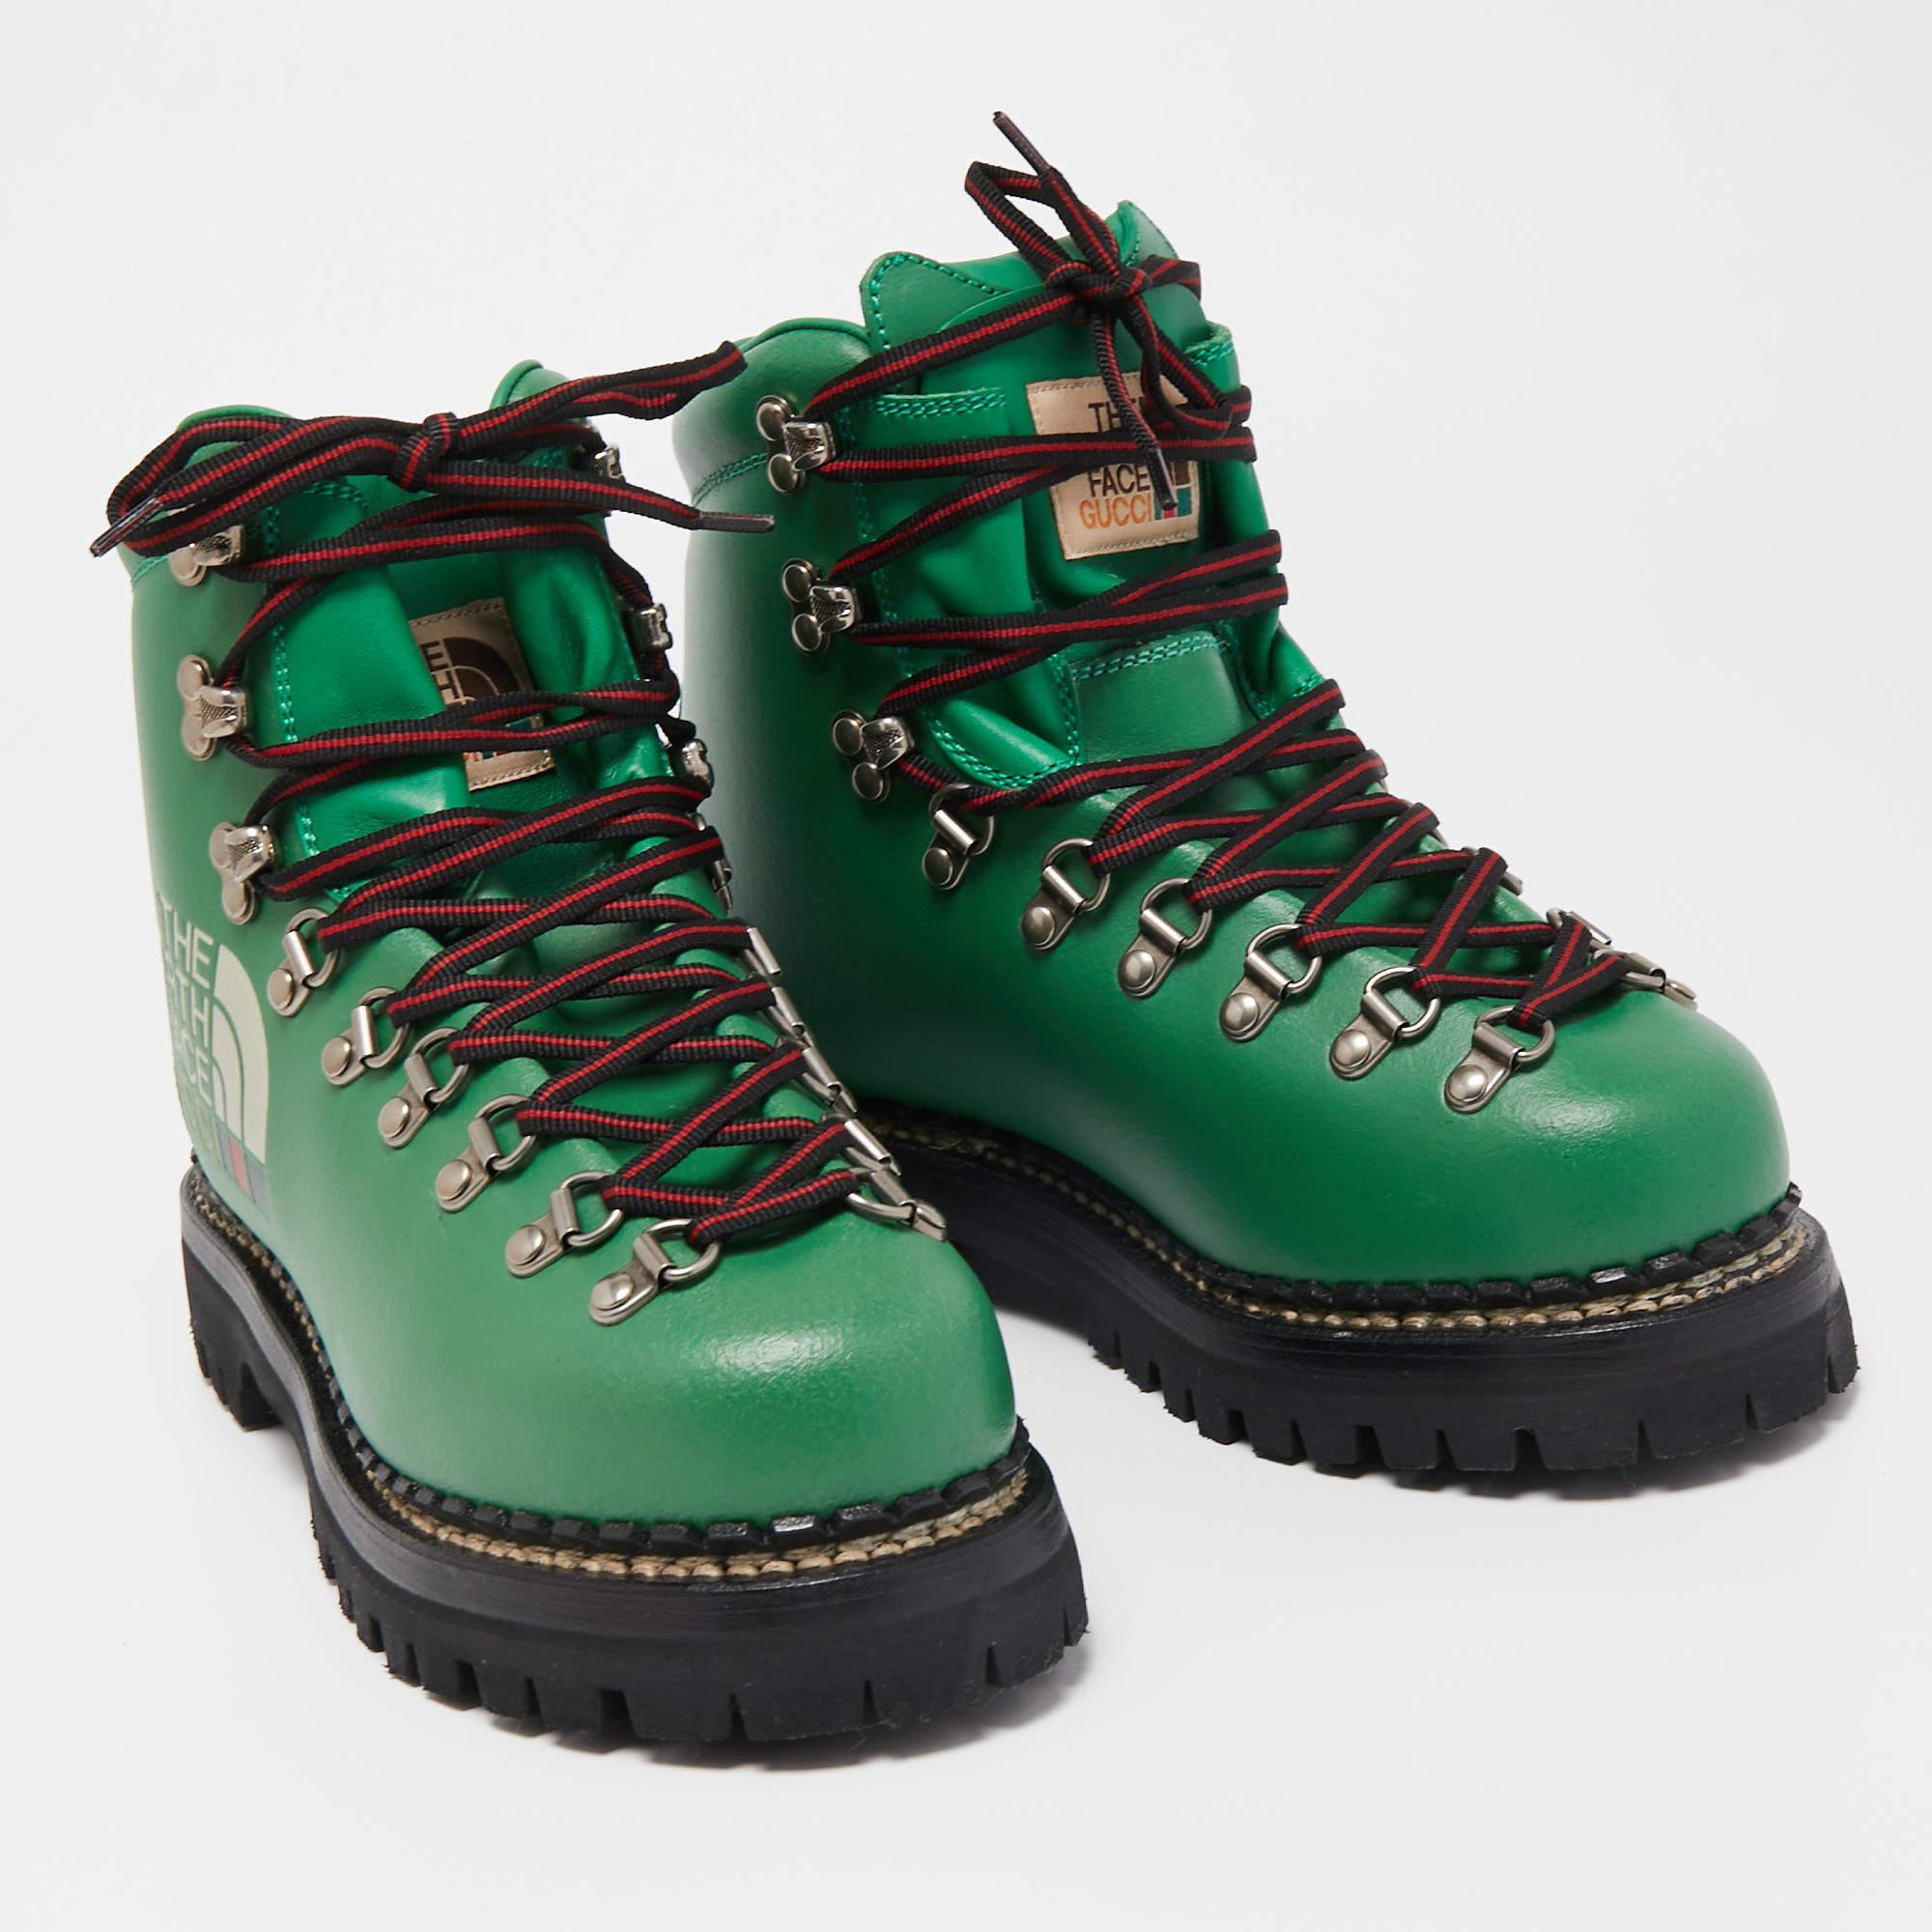 A grand green hue, neat stitching, and fine finishing touches define this pair from the Gucci X The North Face collaboration. The boots are crafted from leather and feature covered toes, lace-up fastening, and details of both the brands.

Includes: